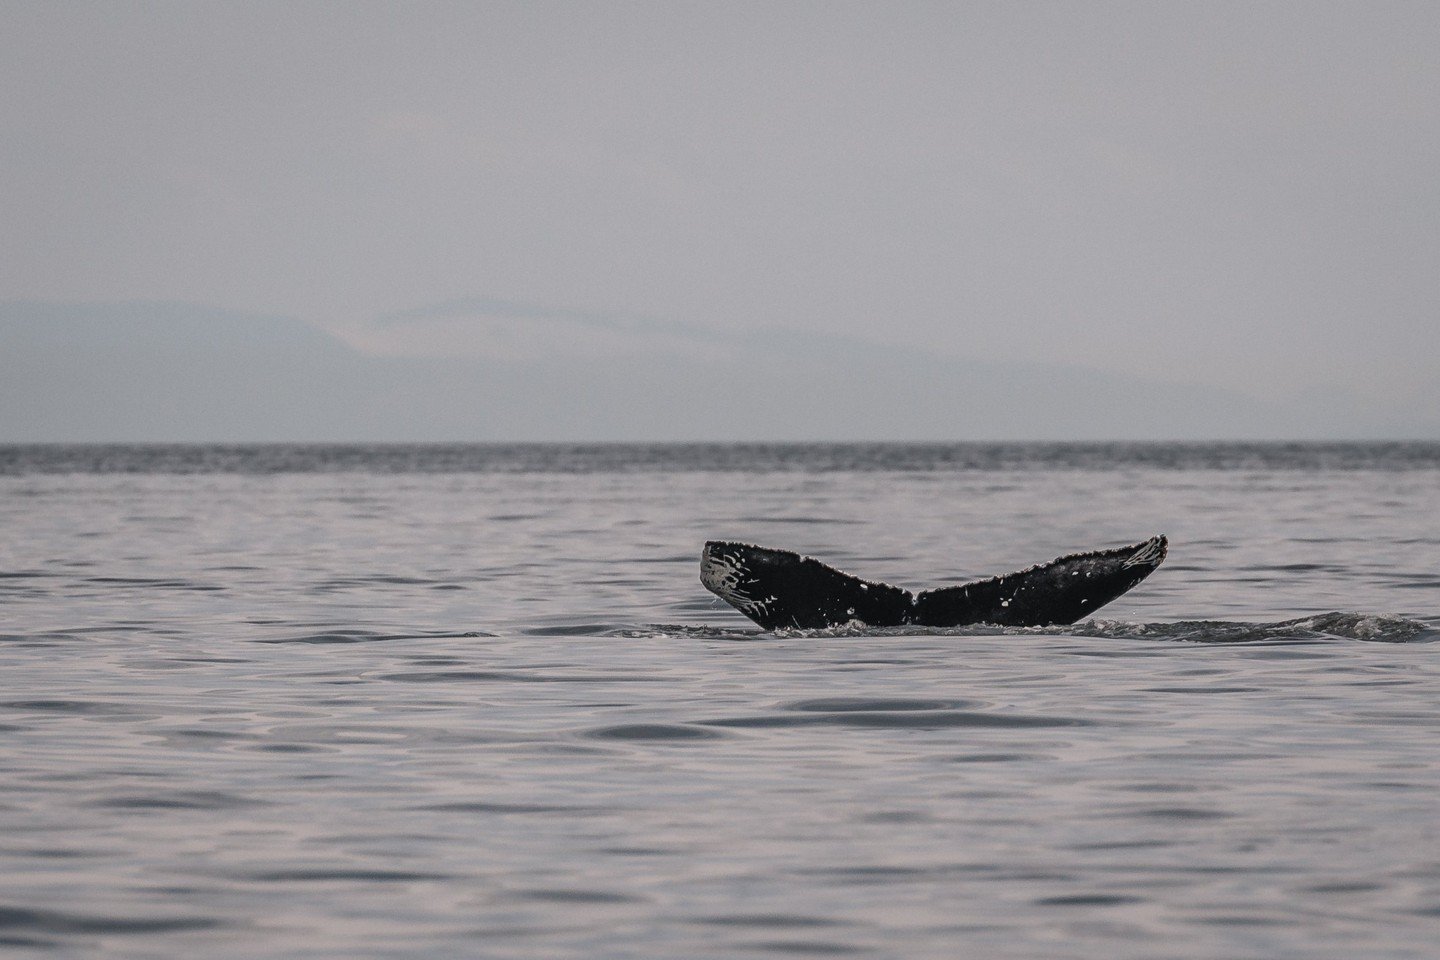 We had our 1st Humpback of the Season on this day in 2022! 

At the time, this little humpback was unknown in the area, but it has since got the designation KEX0069 through the Keta Coastal Conversation humpback catalogue! 

To learn more about this 